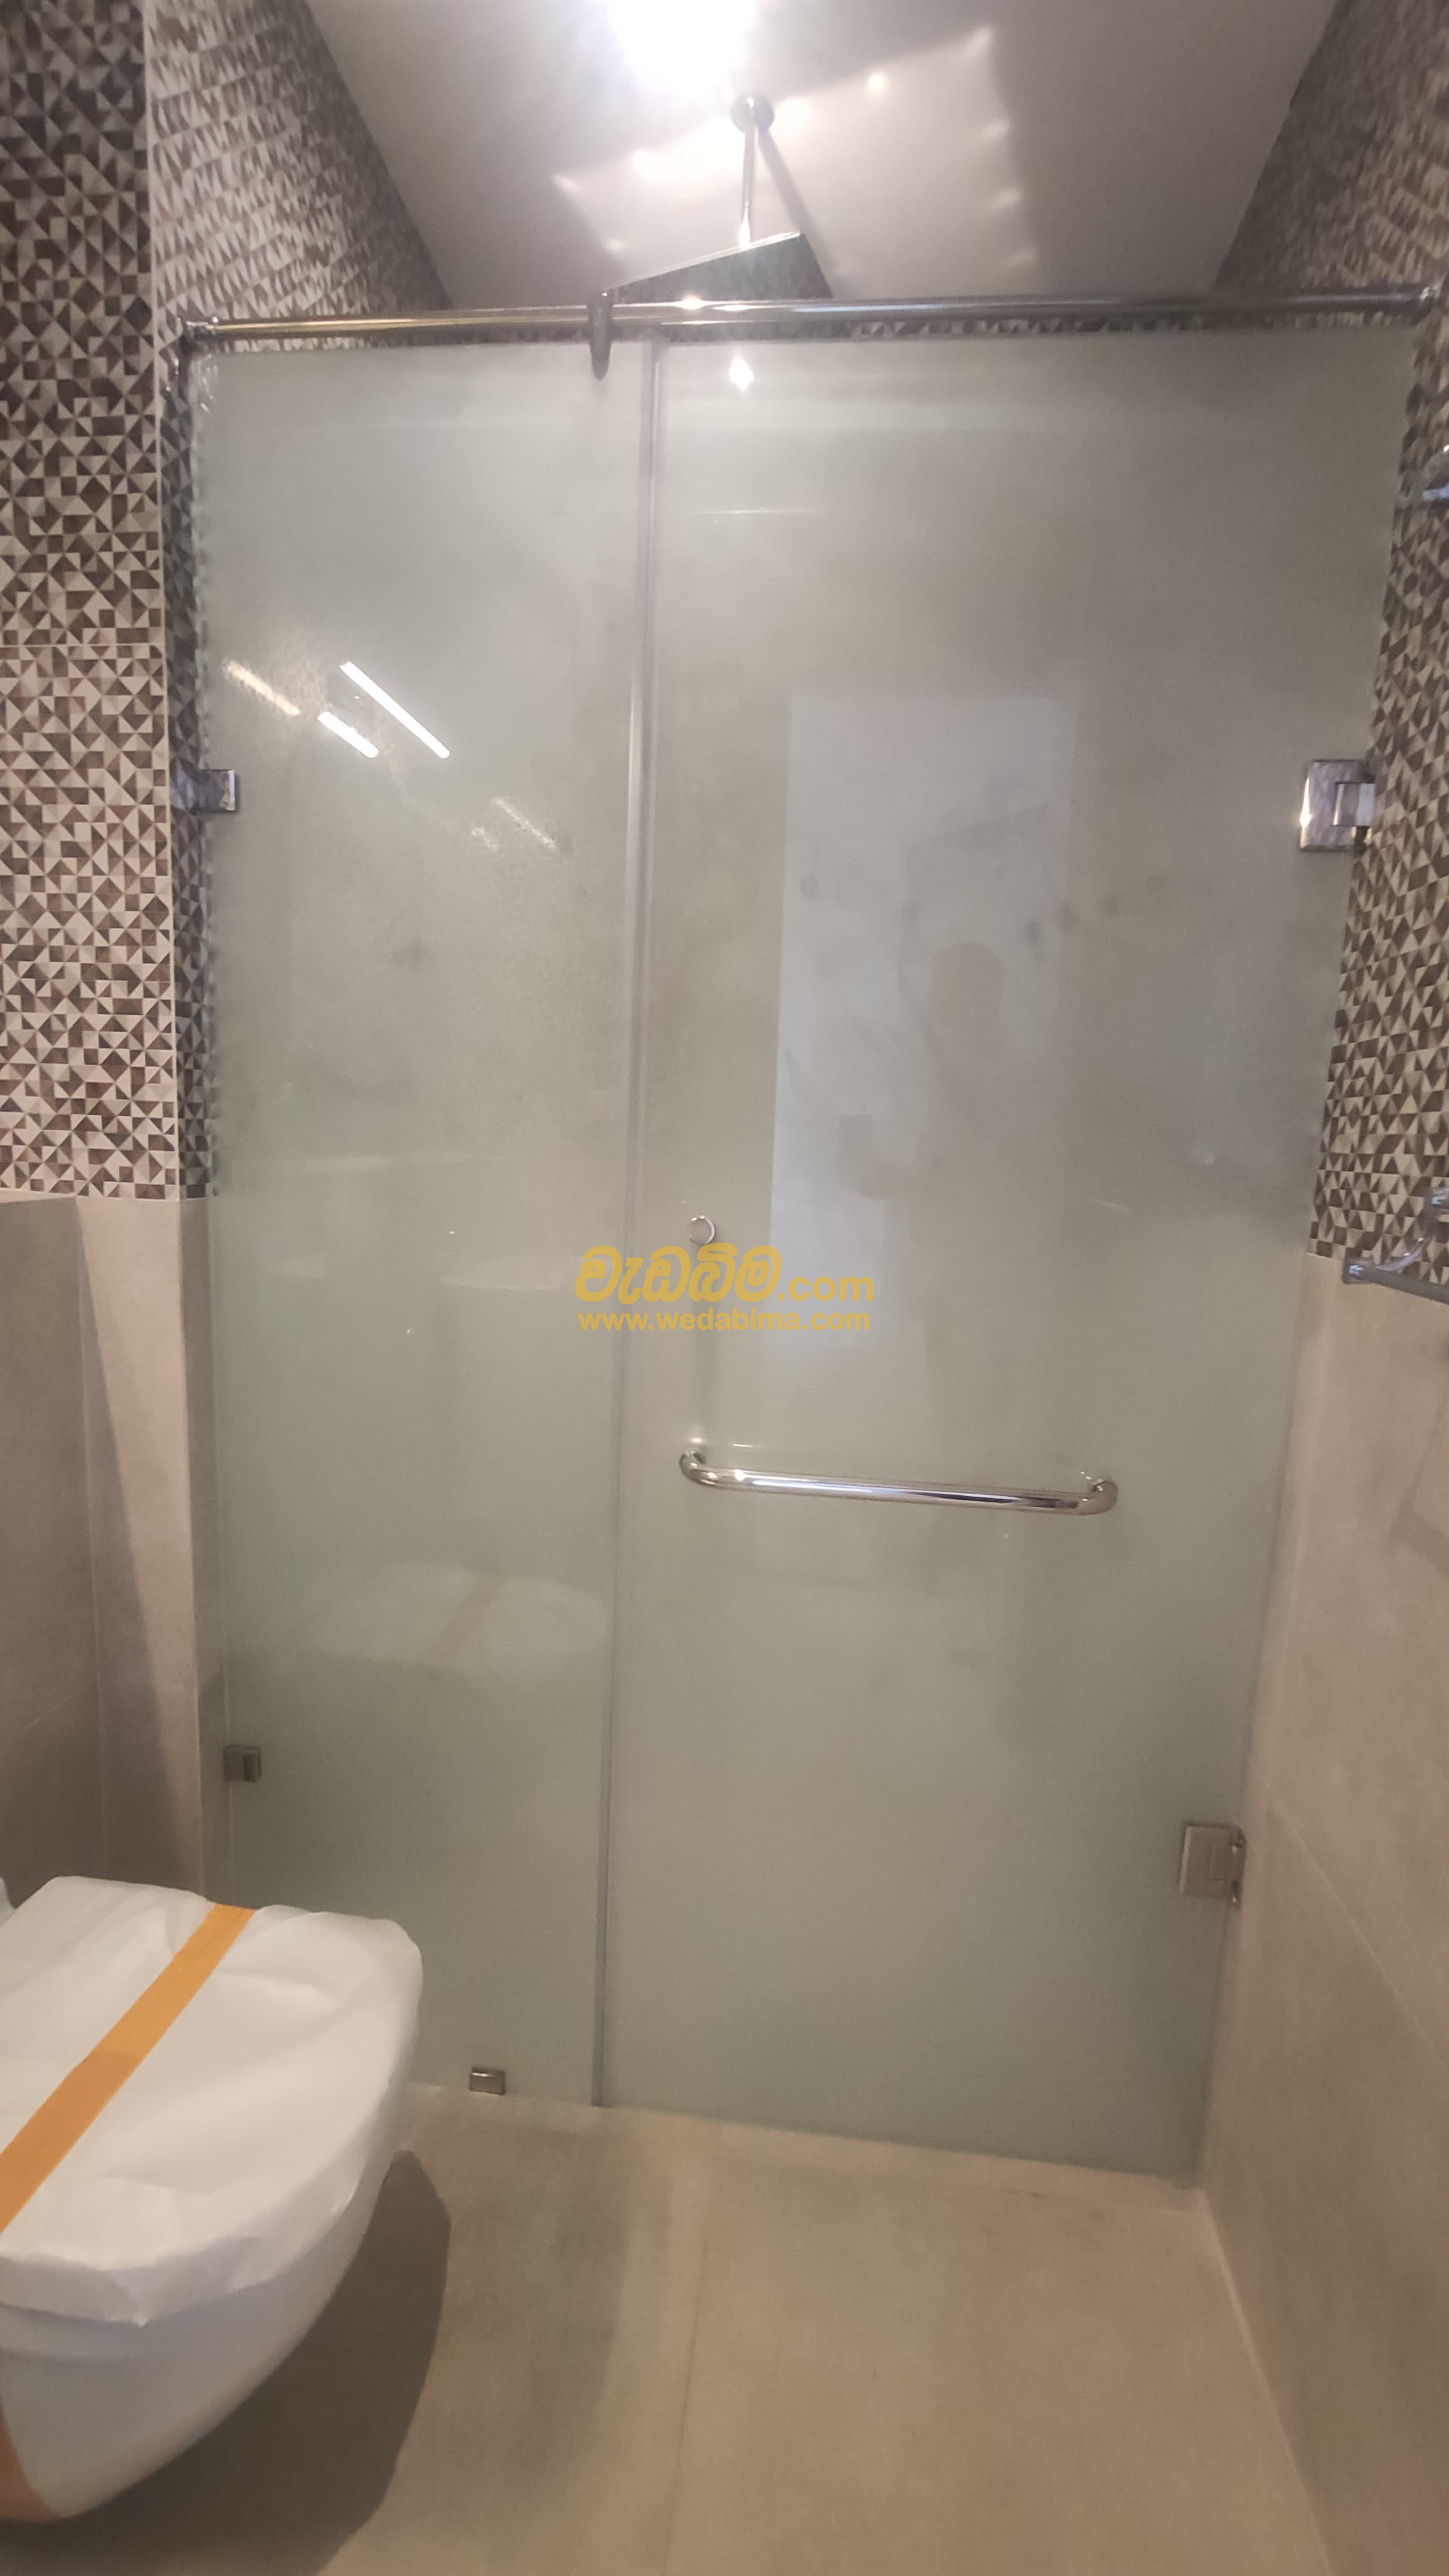 Shower Cubicle - Colombo